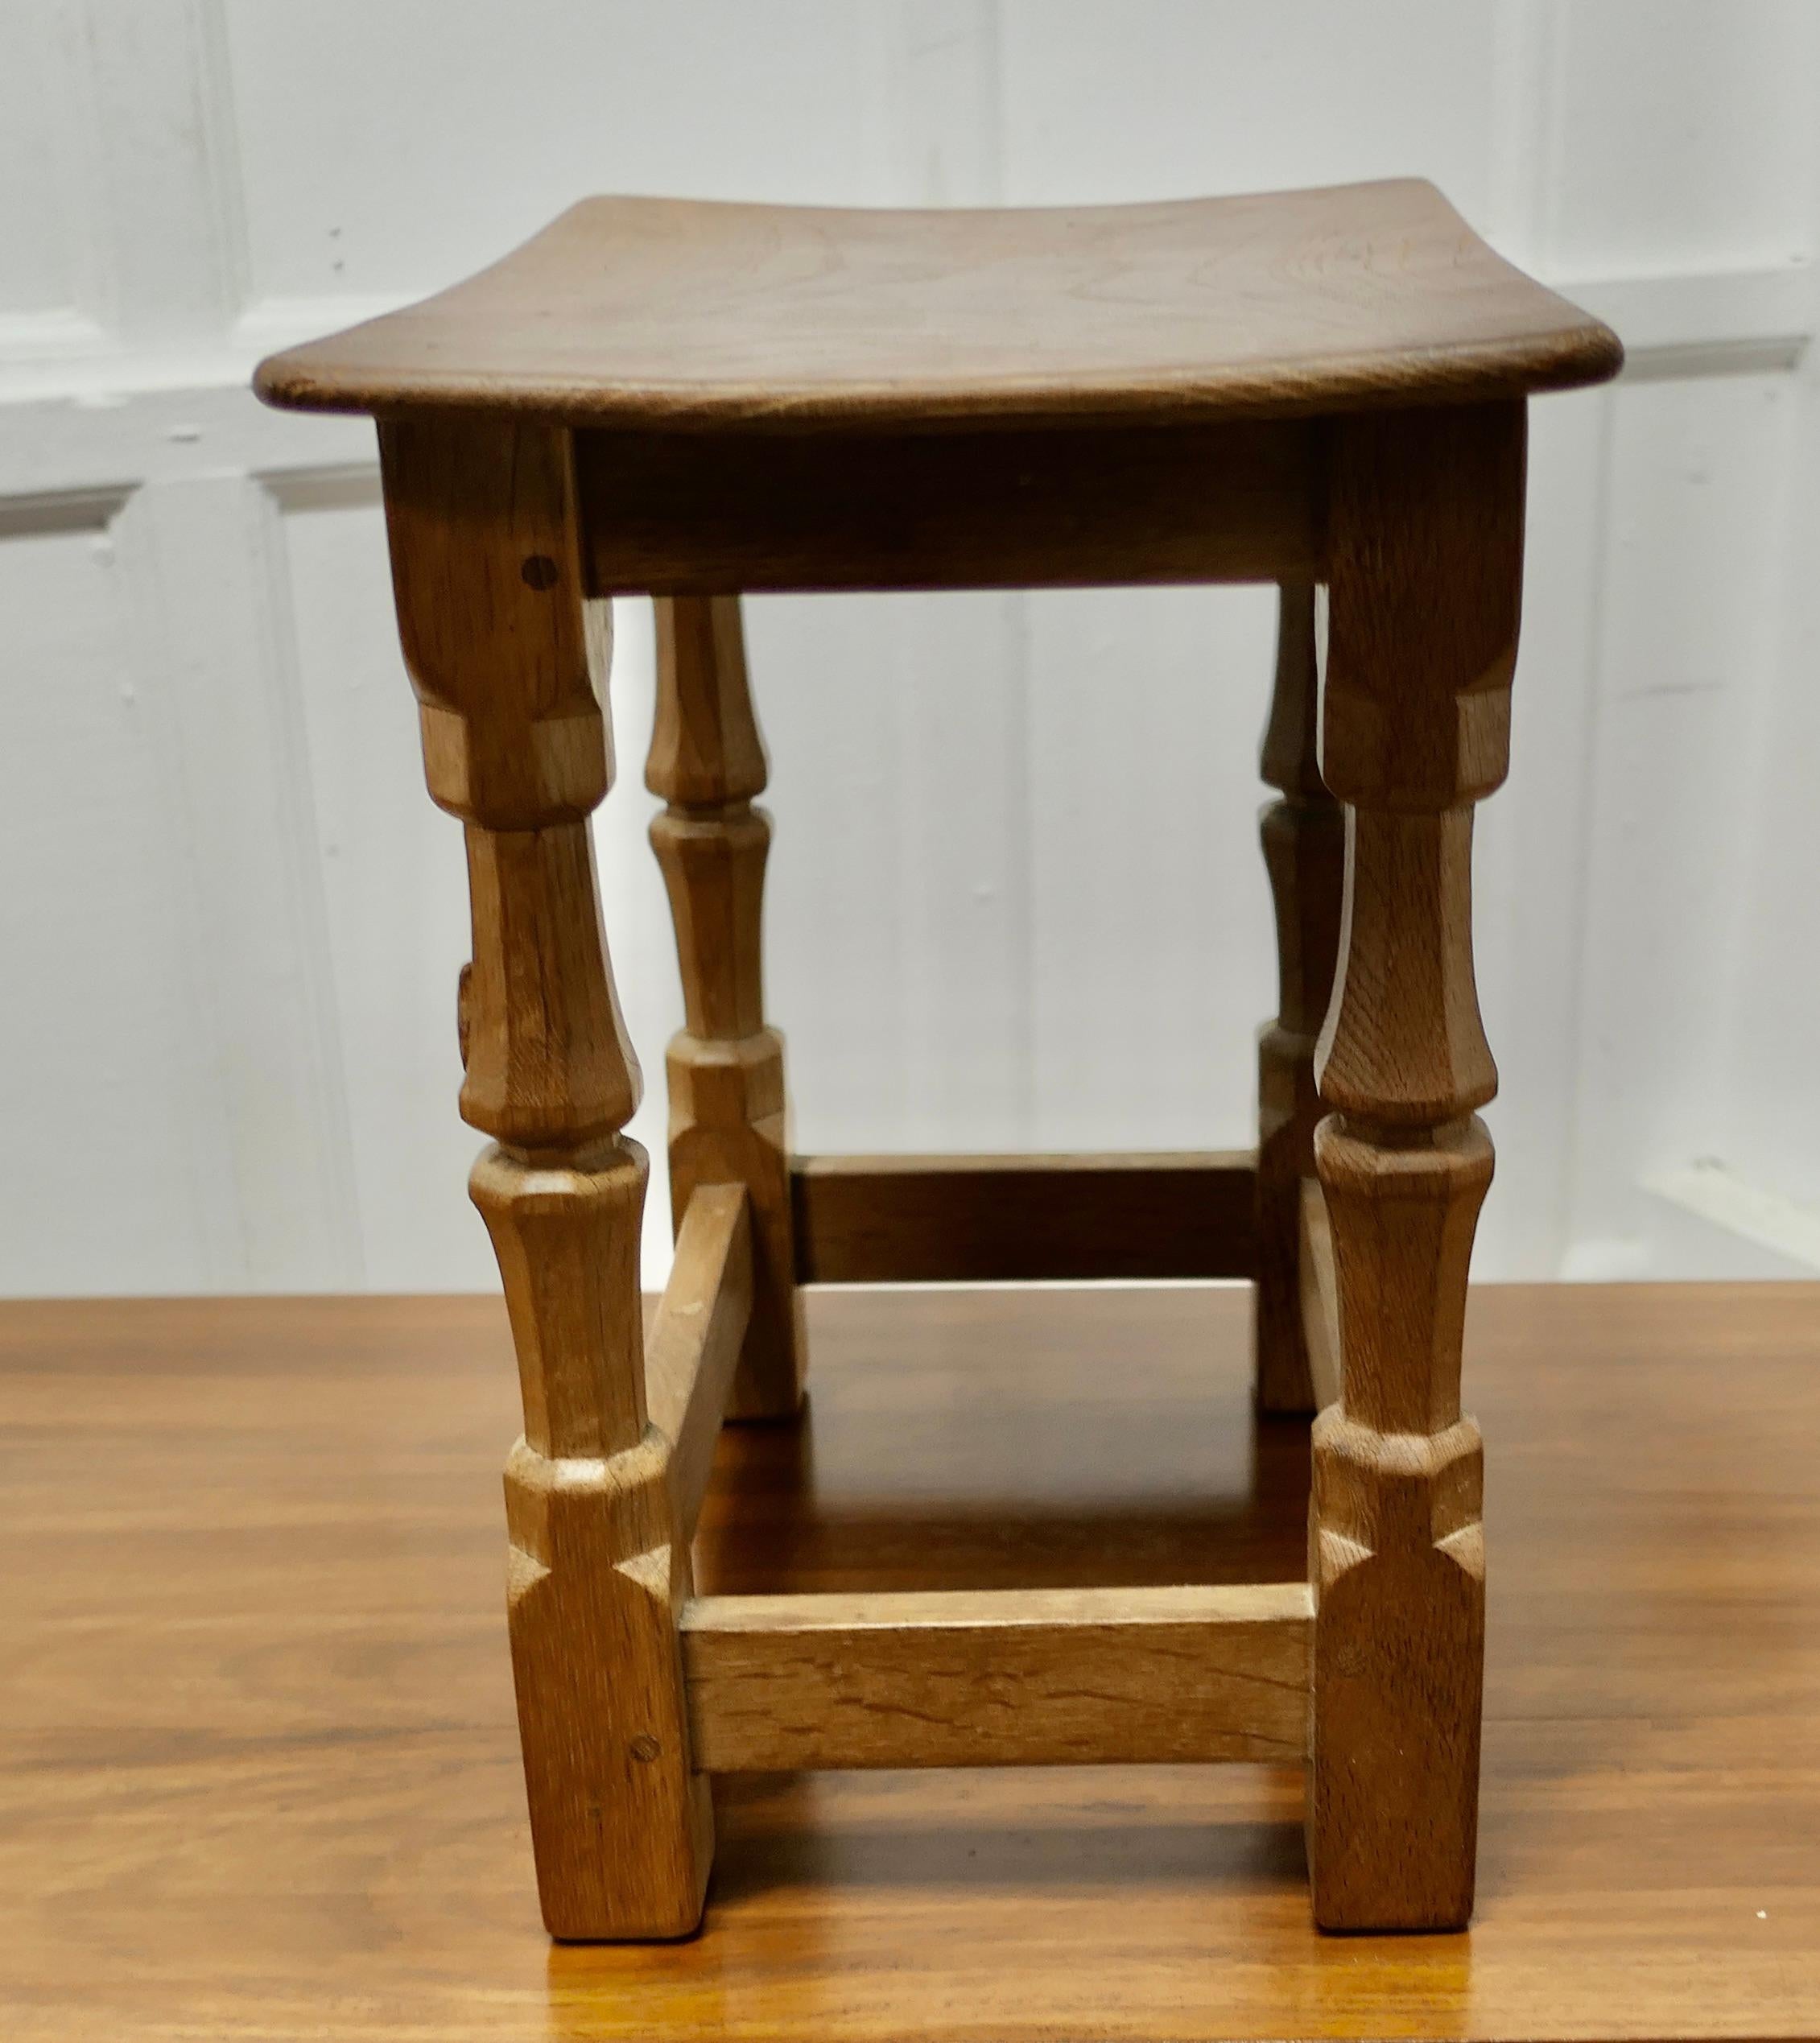 Mid-20th Century Squirrelman Oak Dish Top Adzed Stool by Wilf Hutchinson  Squirrelman Joint Stool For Sale